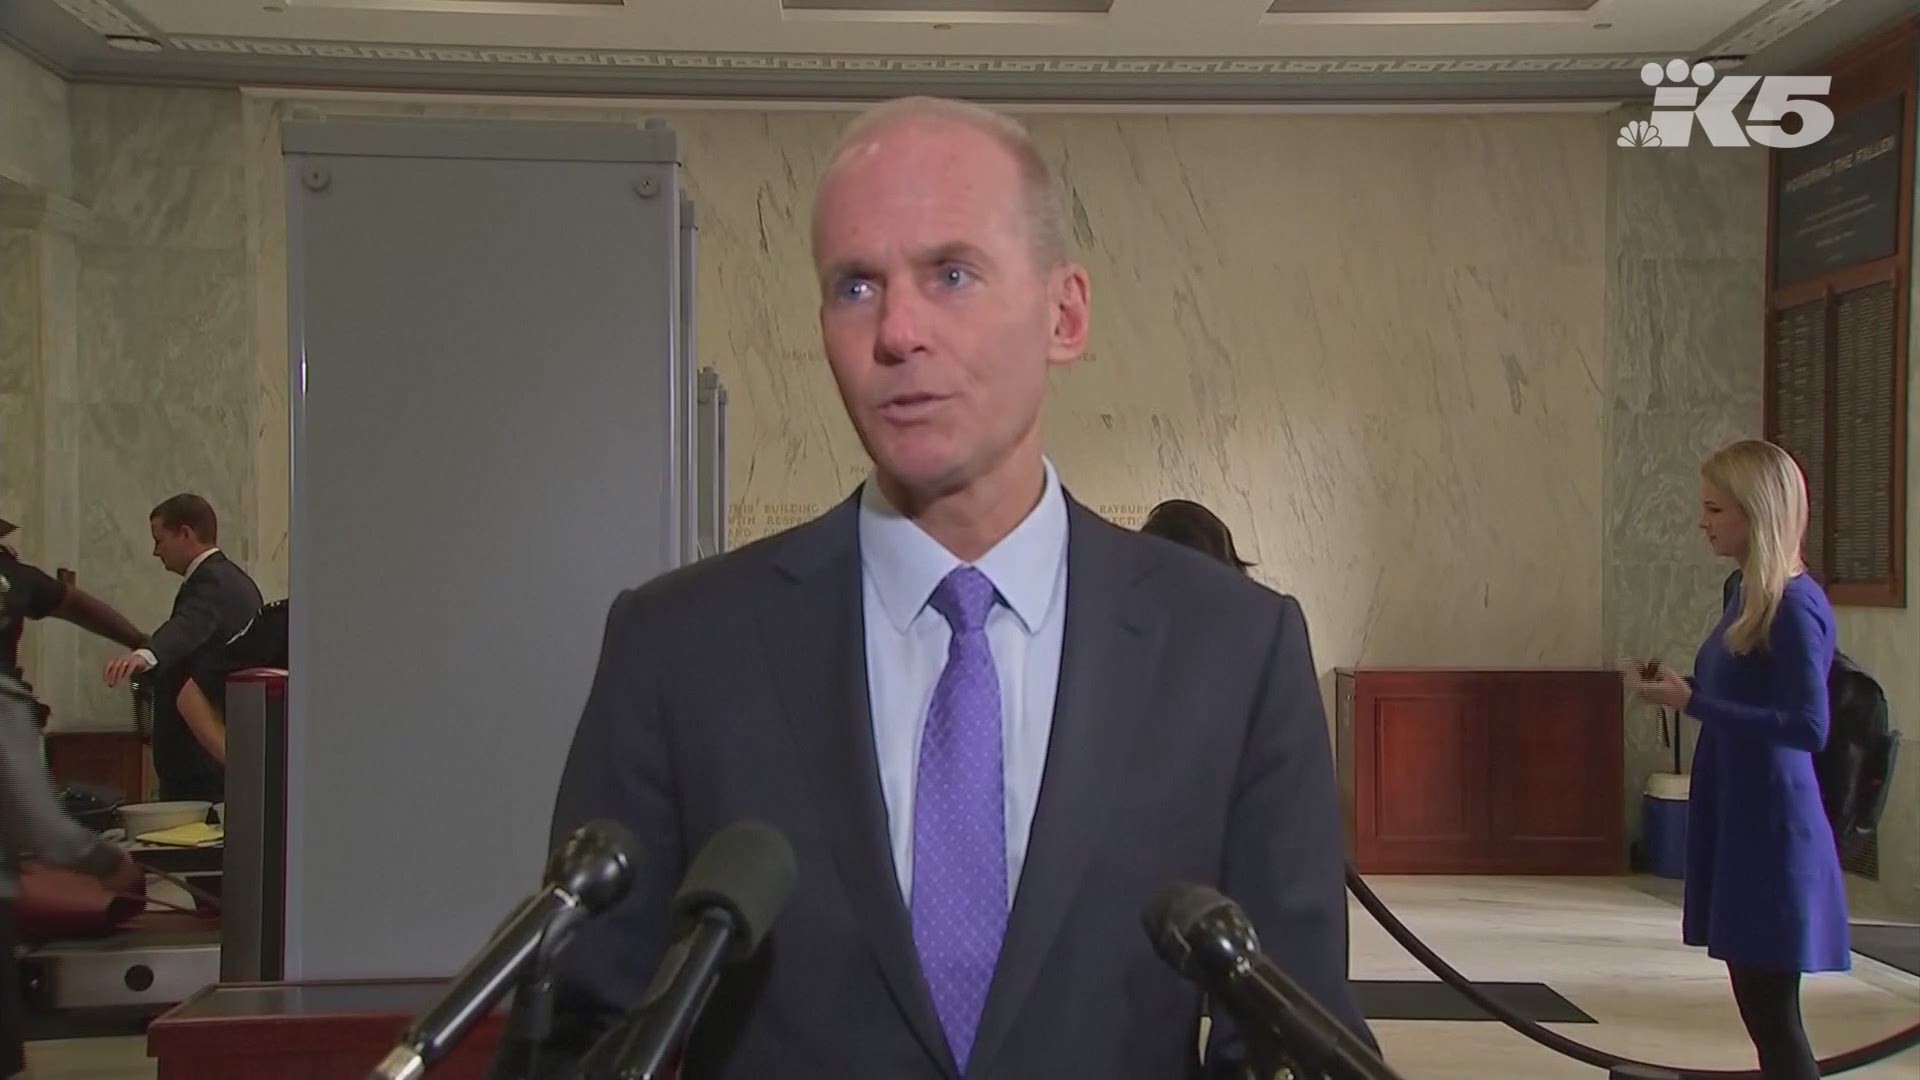 Boeing CEO Dennis Muilenburg makes a statement before his second day of testimony, this time in front of a House of Representatives panel.